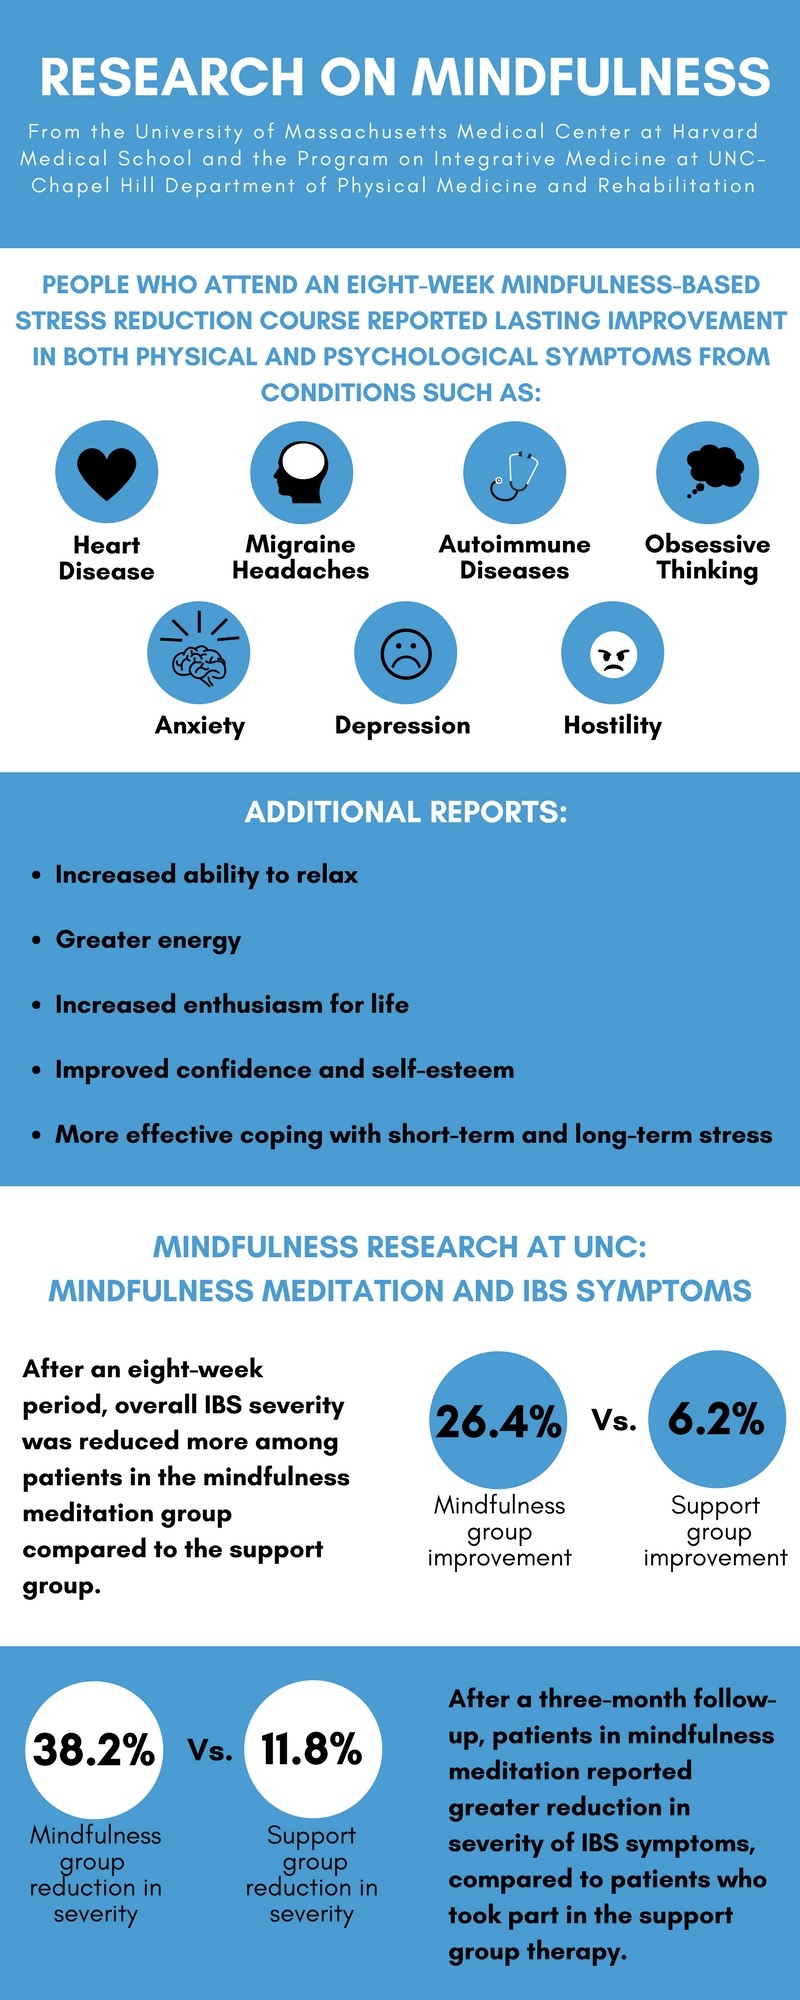 Research on Mindfulness